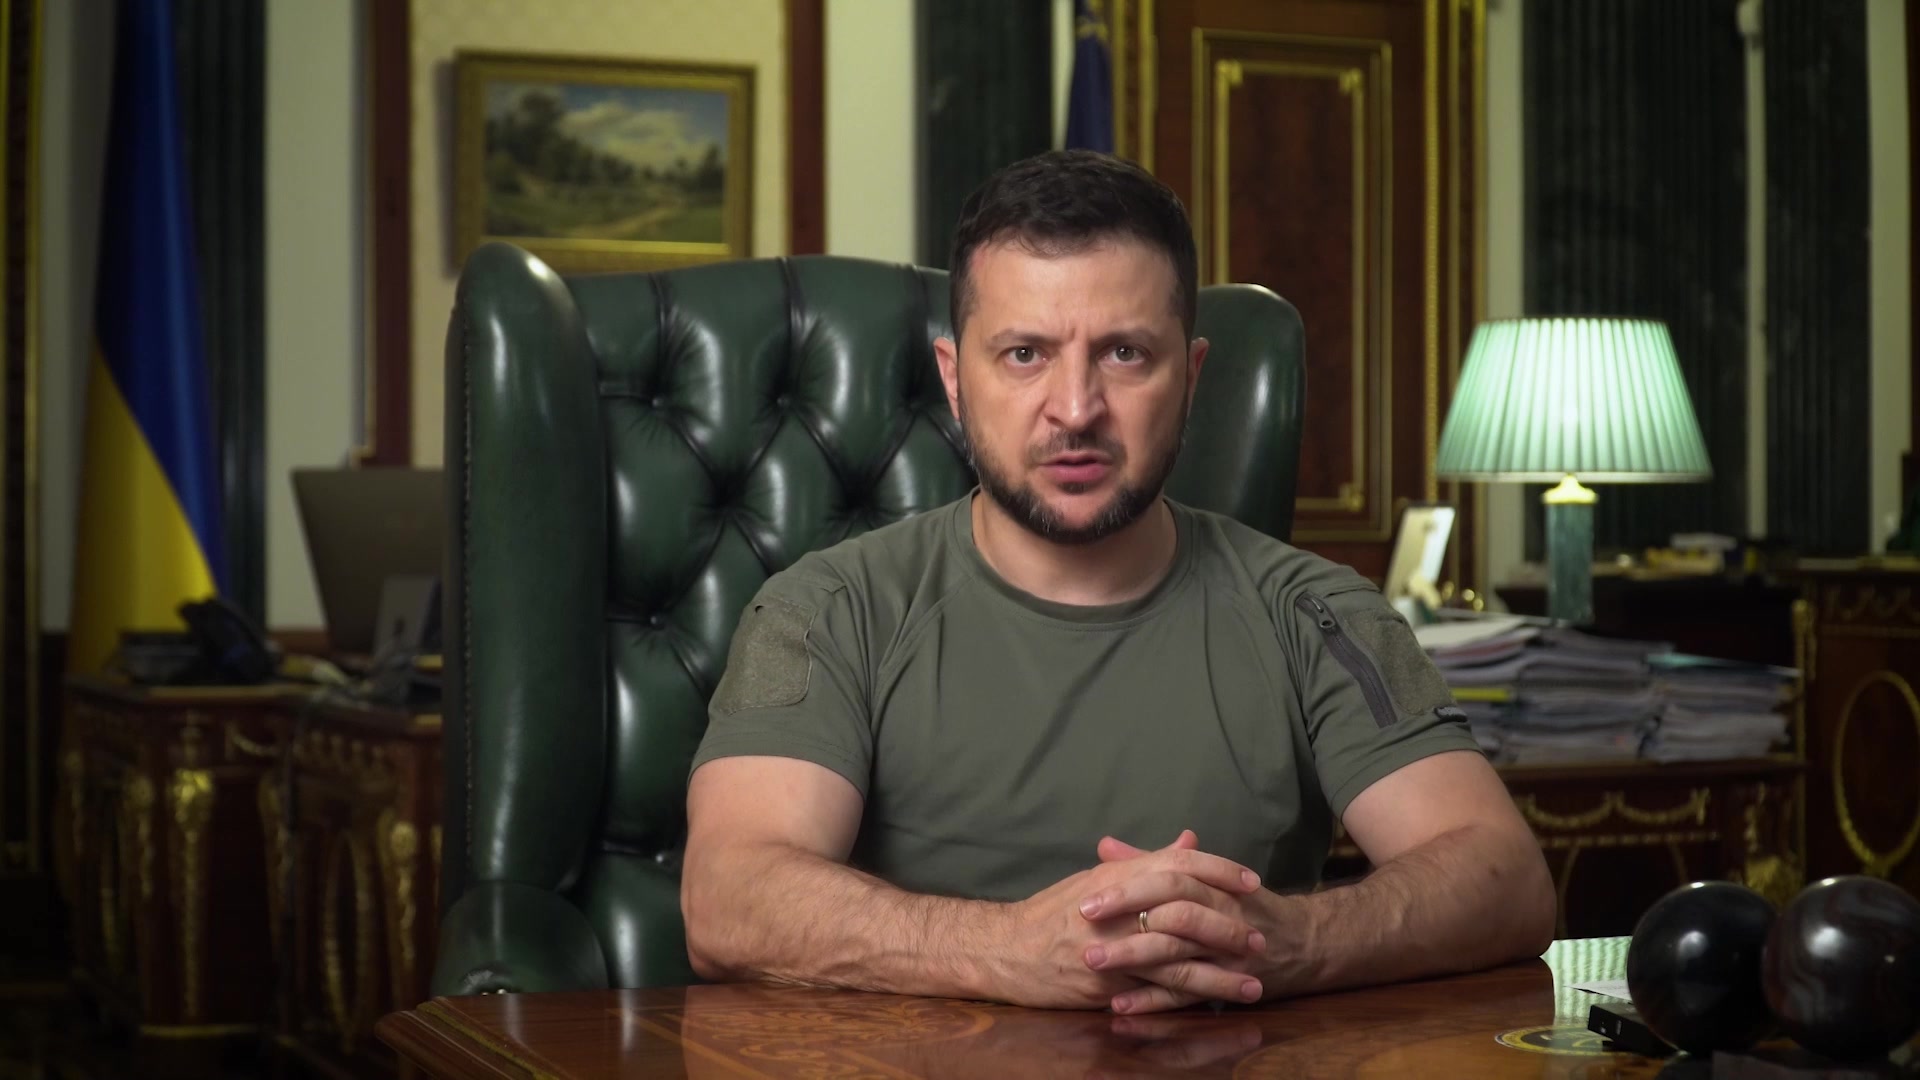 A "catastrophe" at the Zaporizhia nuclear plant, under Russian control, would threaten all of Europe, Ukrainian President Volodimir Zelensky warned on Monday.